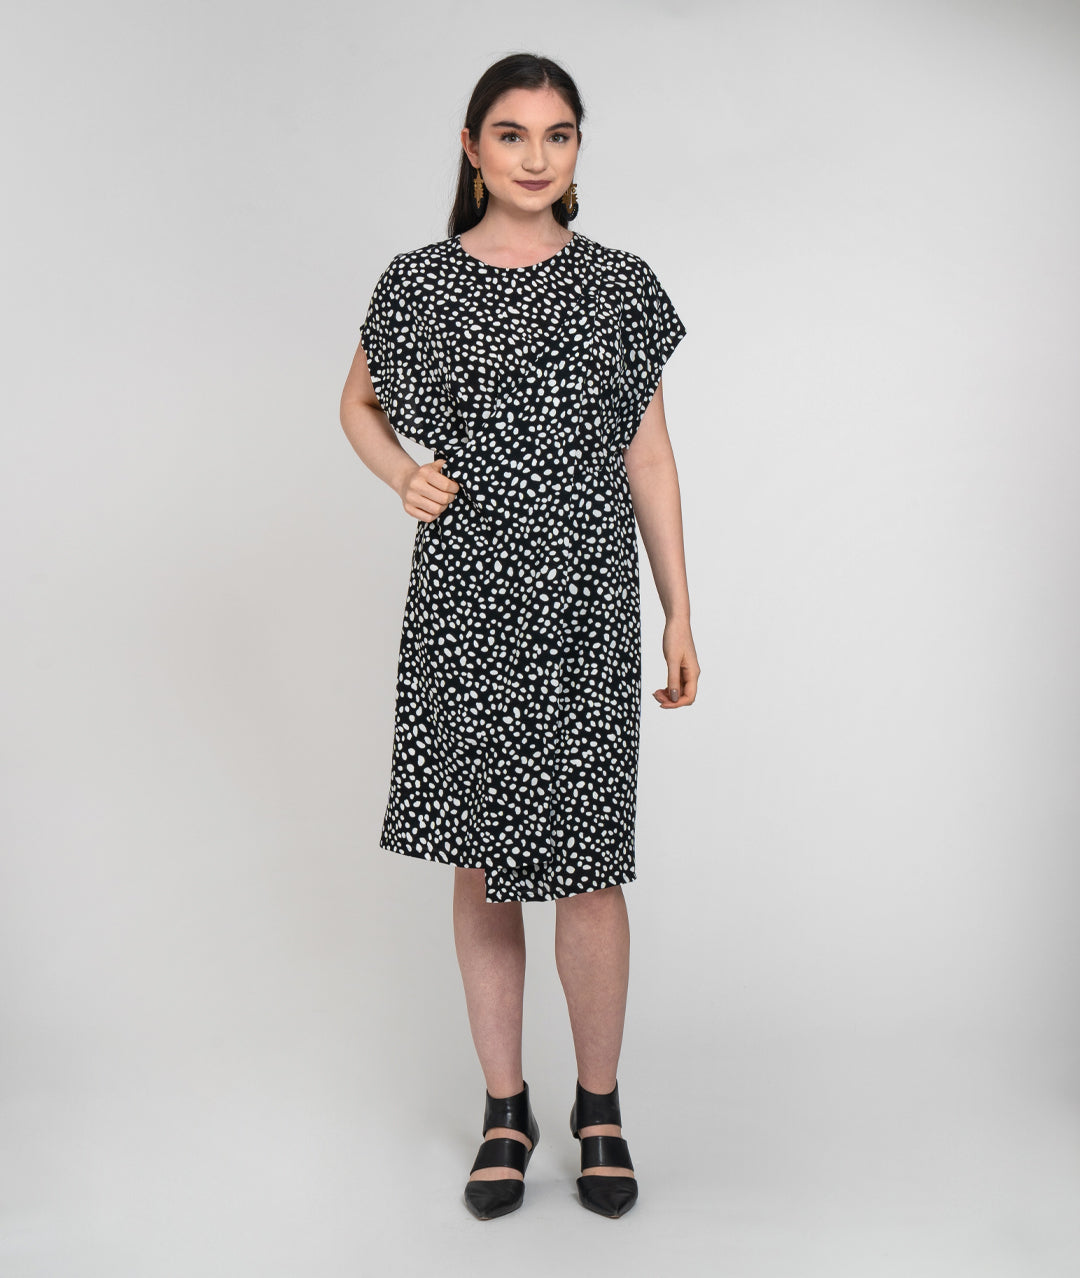 model in a black and white dot print dress with a halter style strap coming from the side panels to around her neck